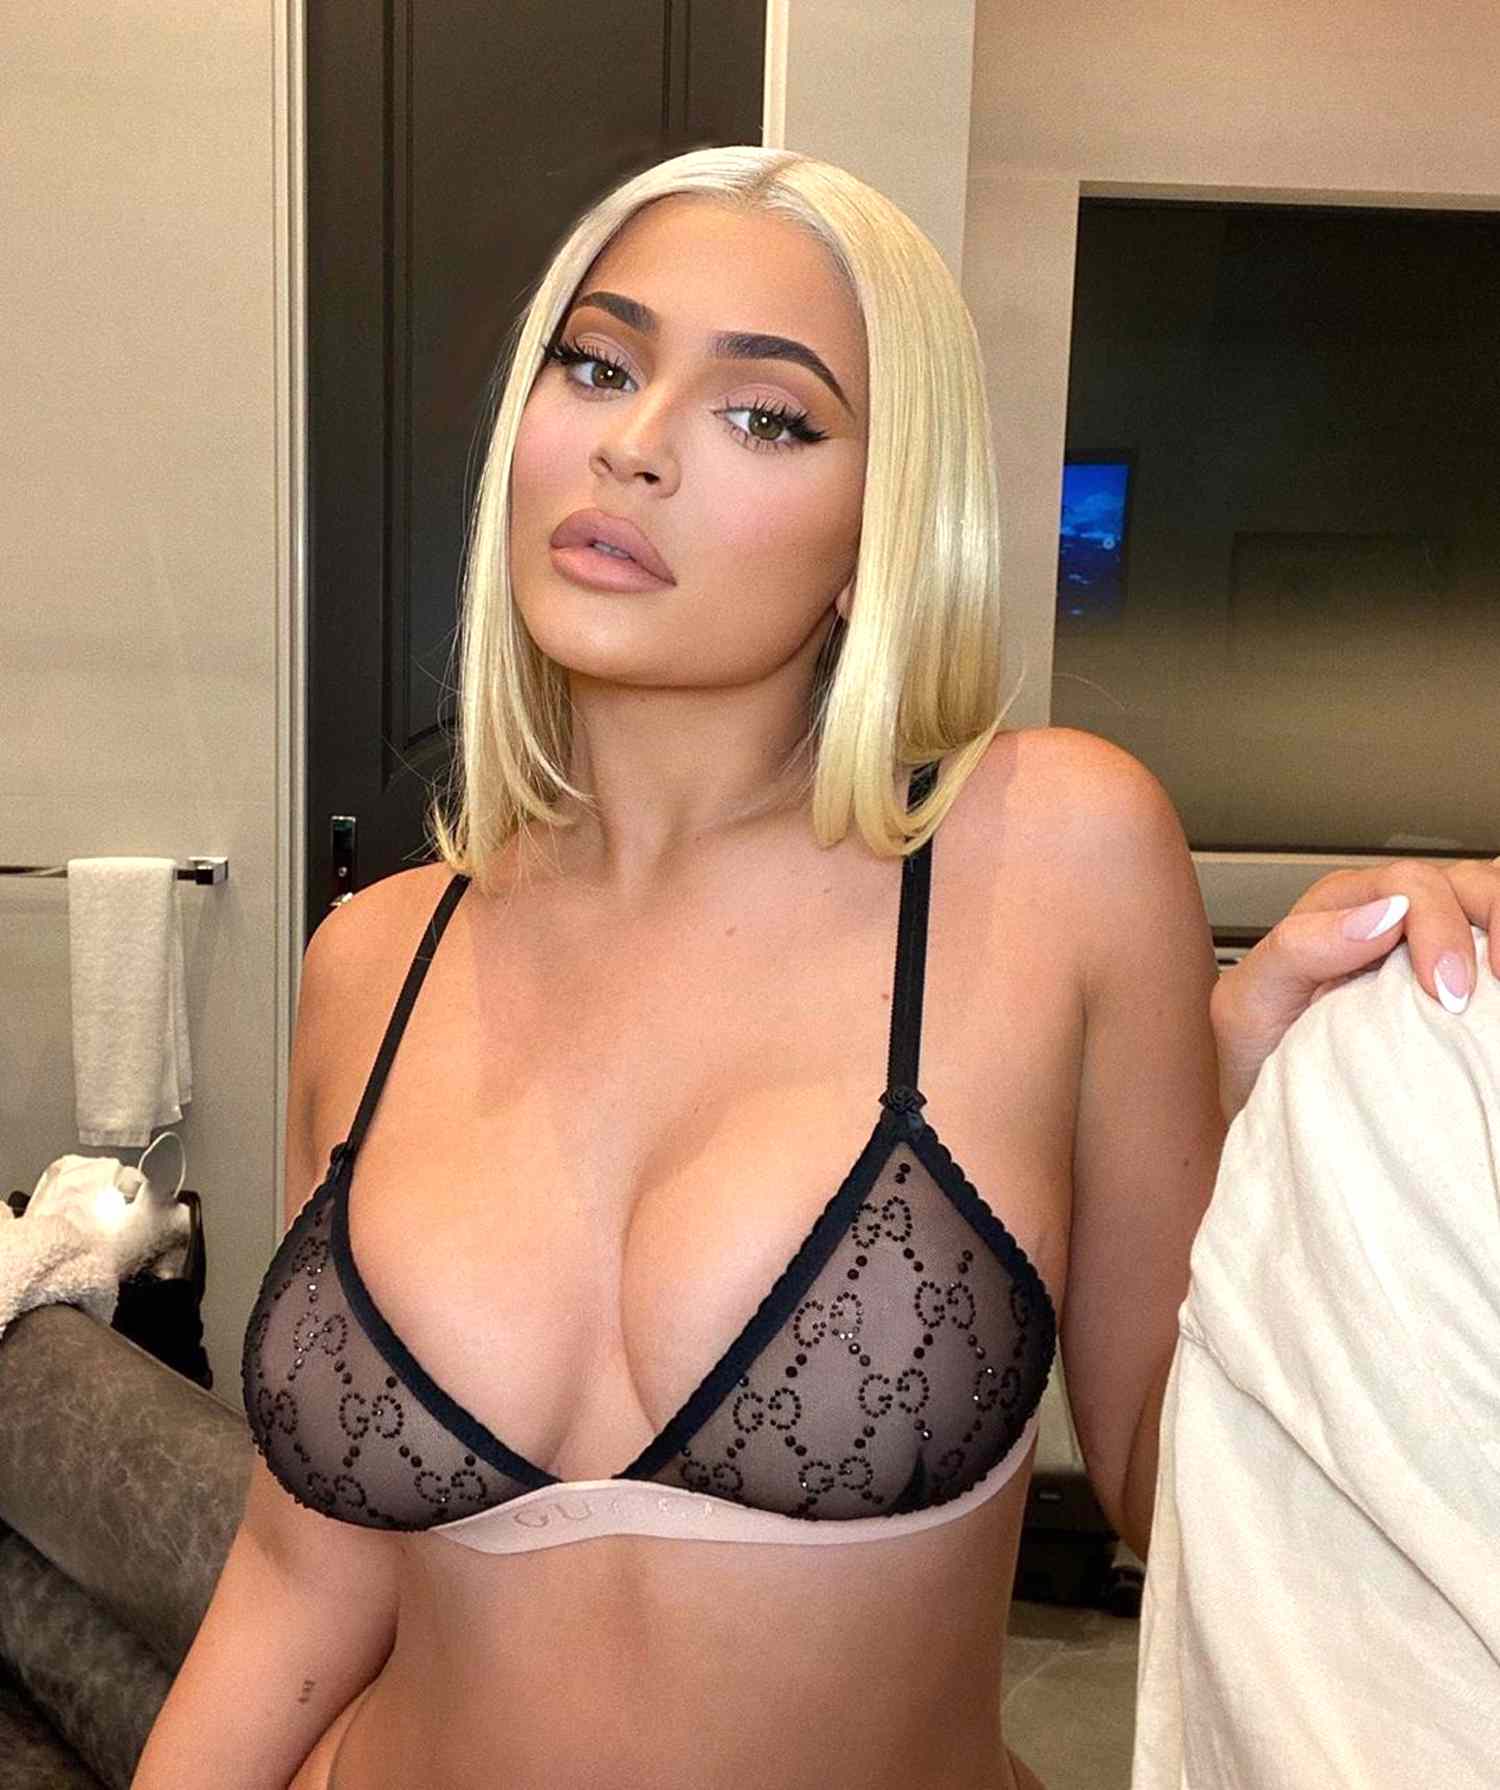 Blonde in lingerie selfie Kylie Jenner Shows Off New Blonde Hair While Modeling Lingerie People Com